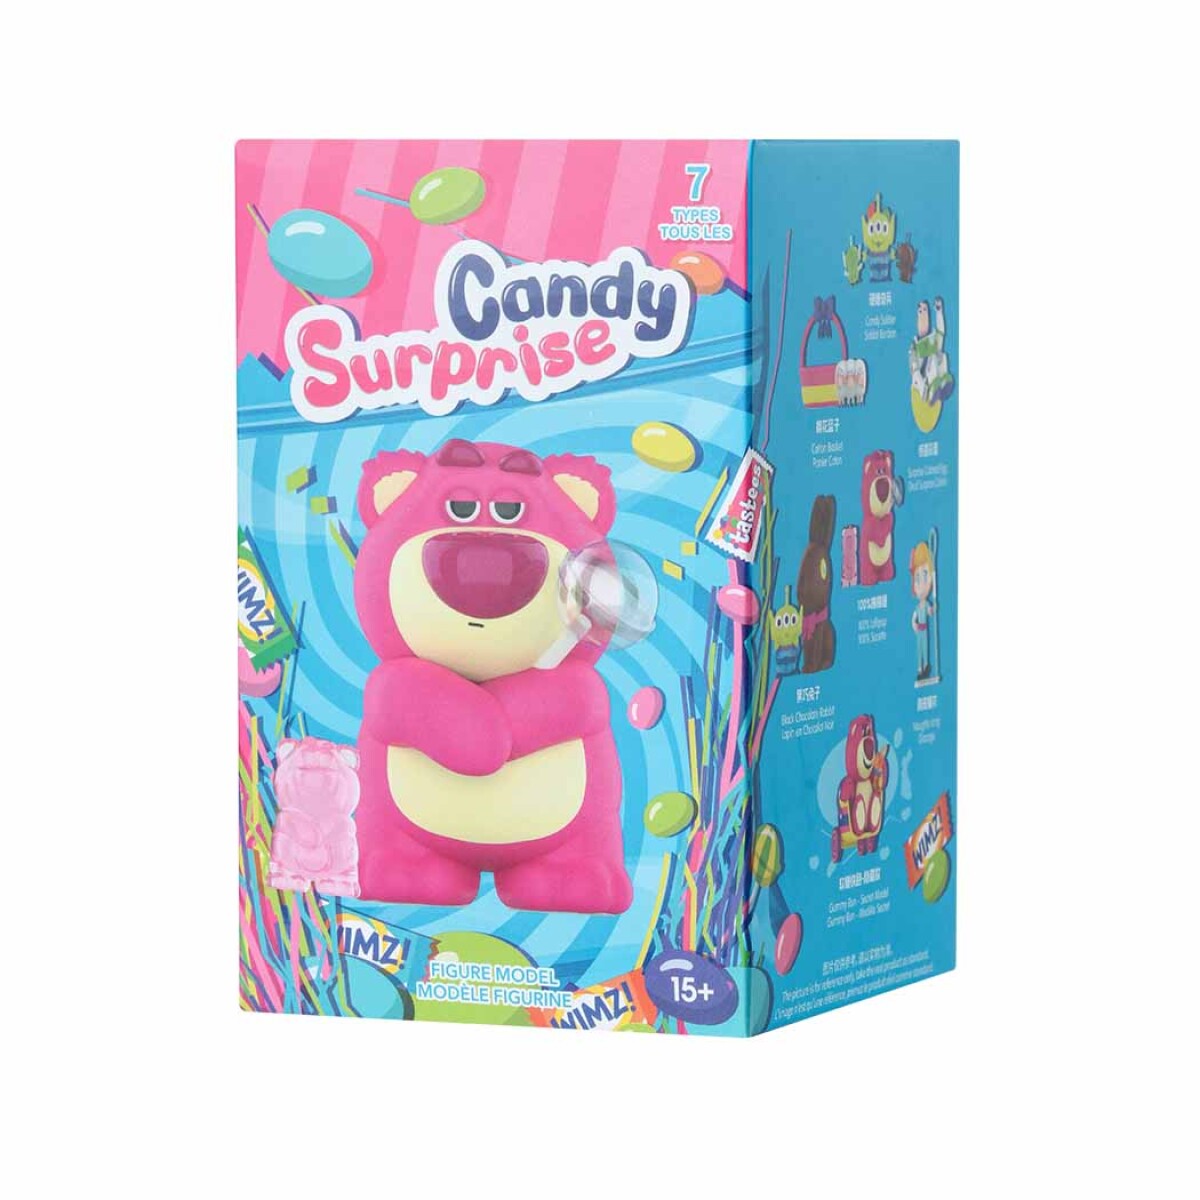 Blind box Toy Stoy candy 